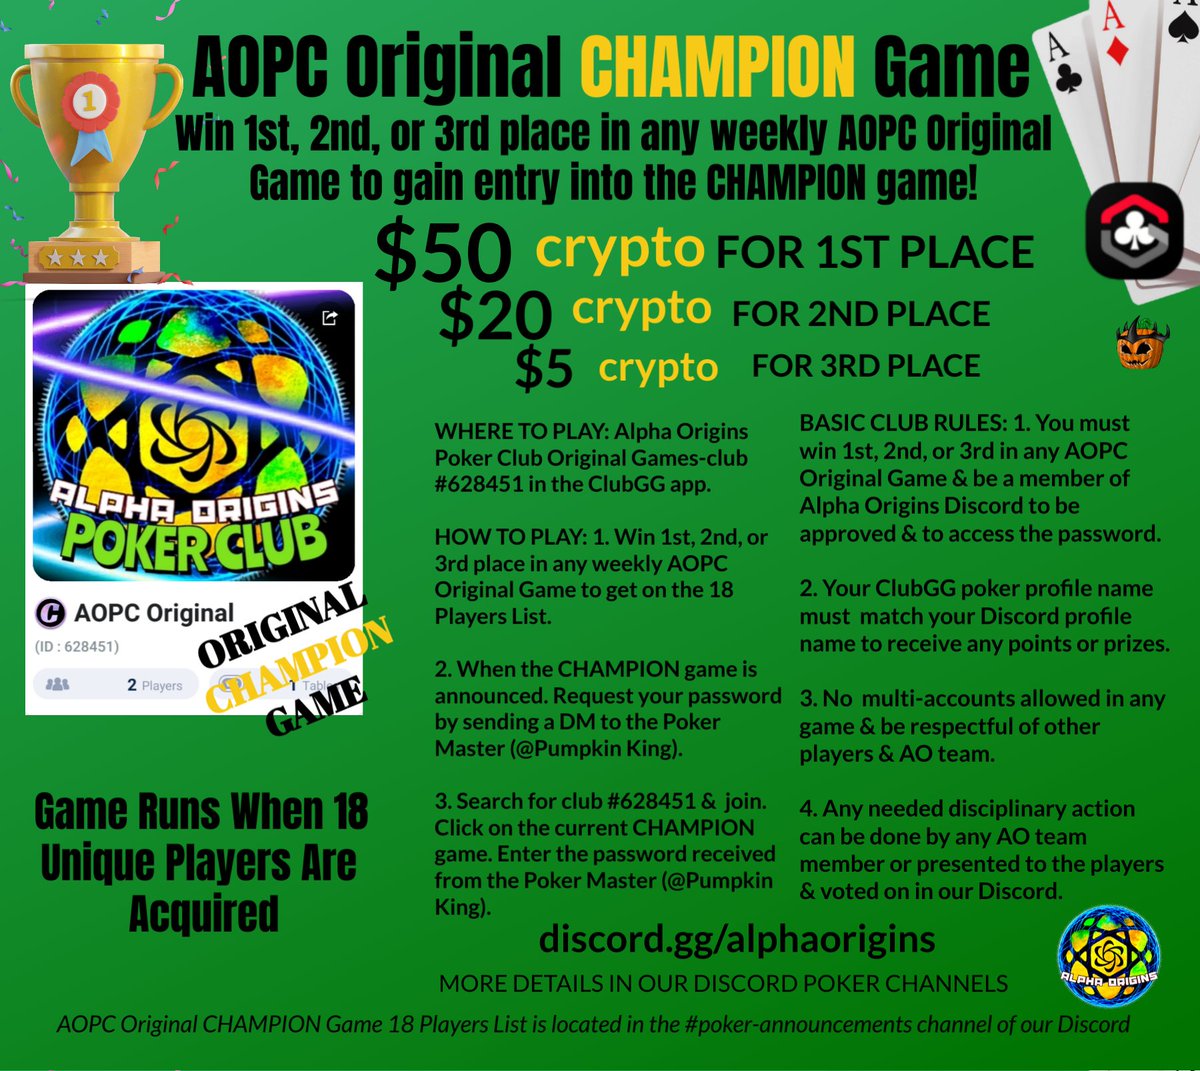 🃏 Join us tonight at 8PM ET for the AOPC Original Game! ♠️♦️ The top three winners will earn a seat at the prestigious AOPC Champions Game! 🏆 Don't miss out on your chance to compete and claim victory. See you at the tables!♣️♥️💥 #AOPC #PokerNight #Poker #Games #Cards